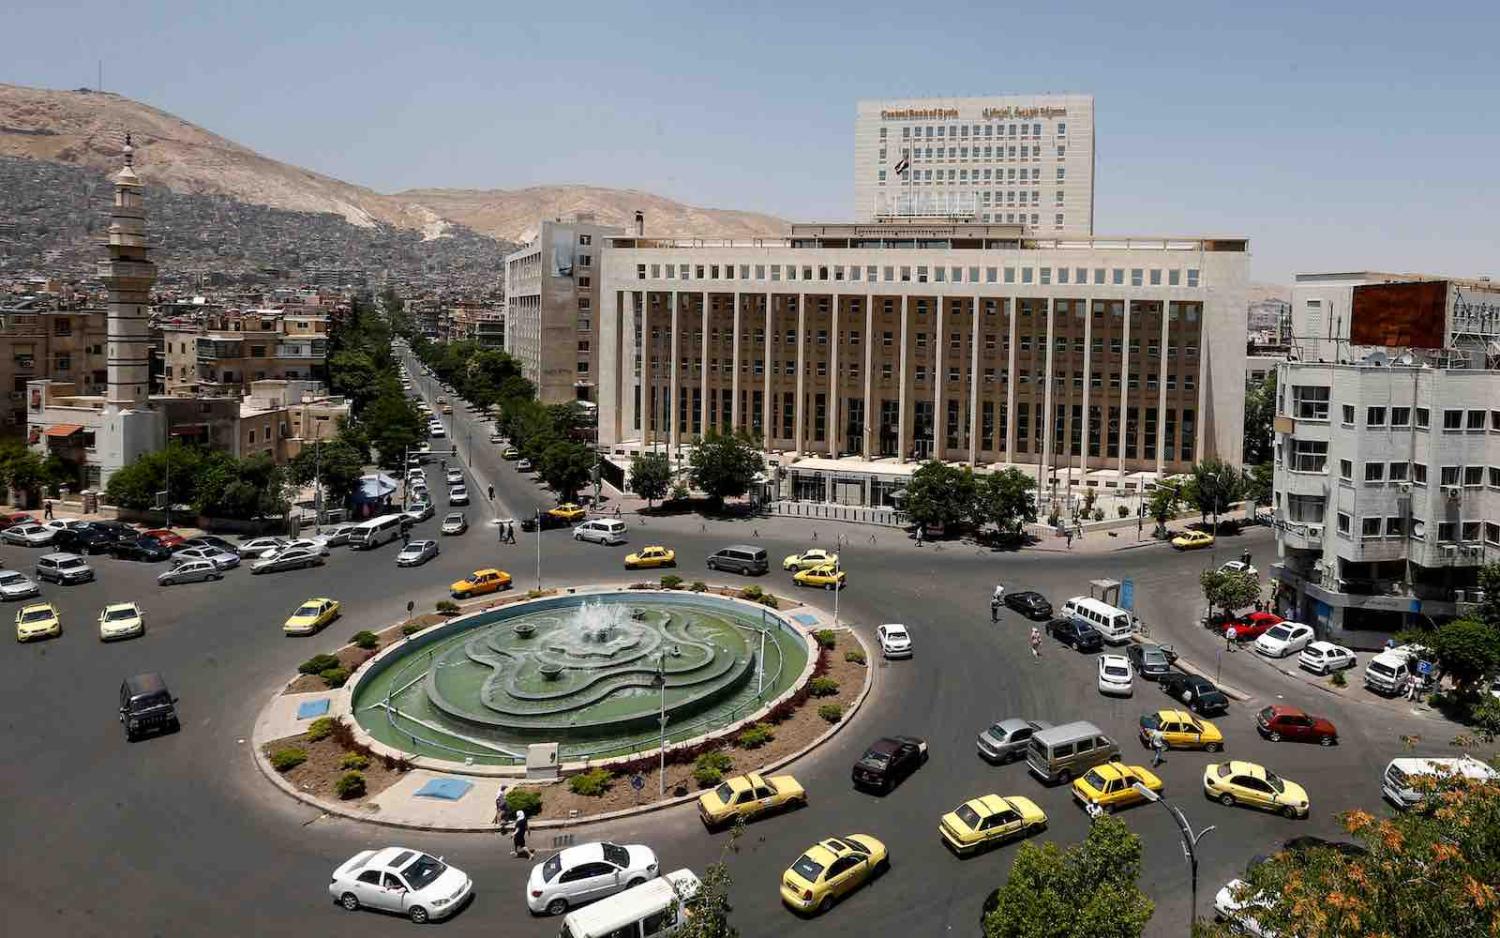 The Central Bank of Syria headquarters in Damascus, 17 June 2020 (Louai Beshara/AFP via Getty Images)